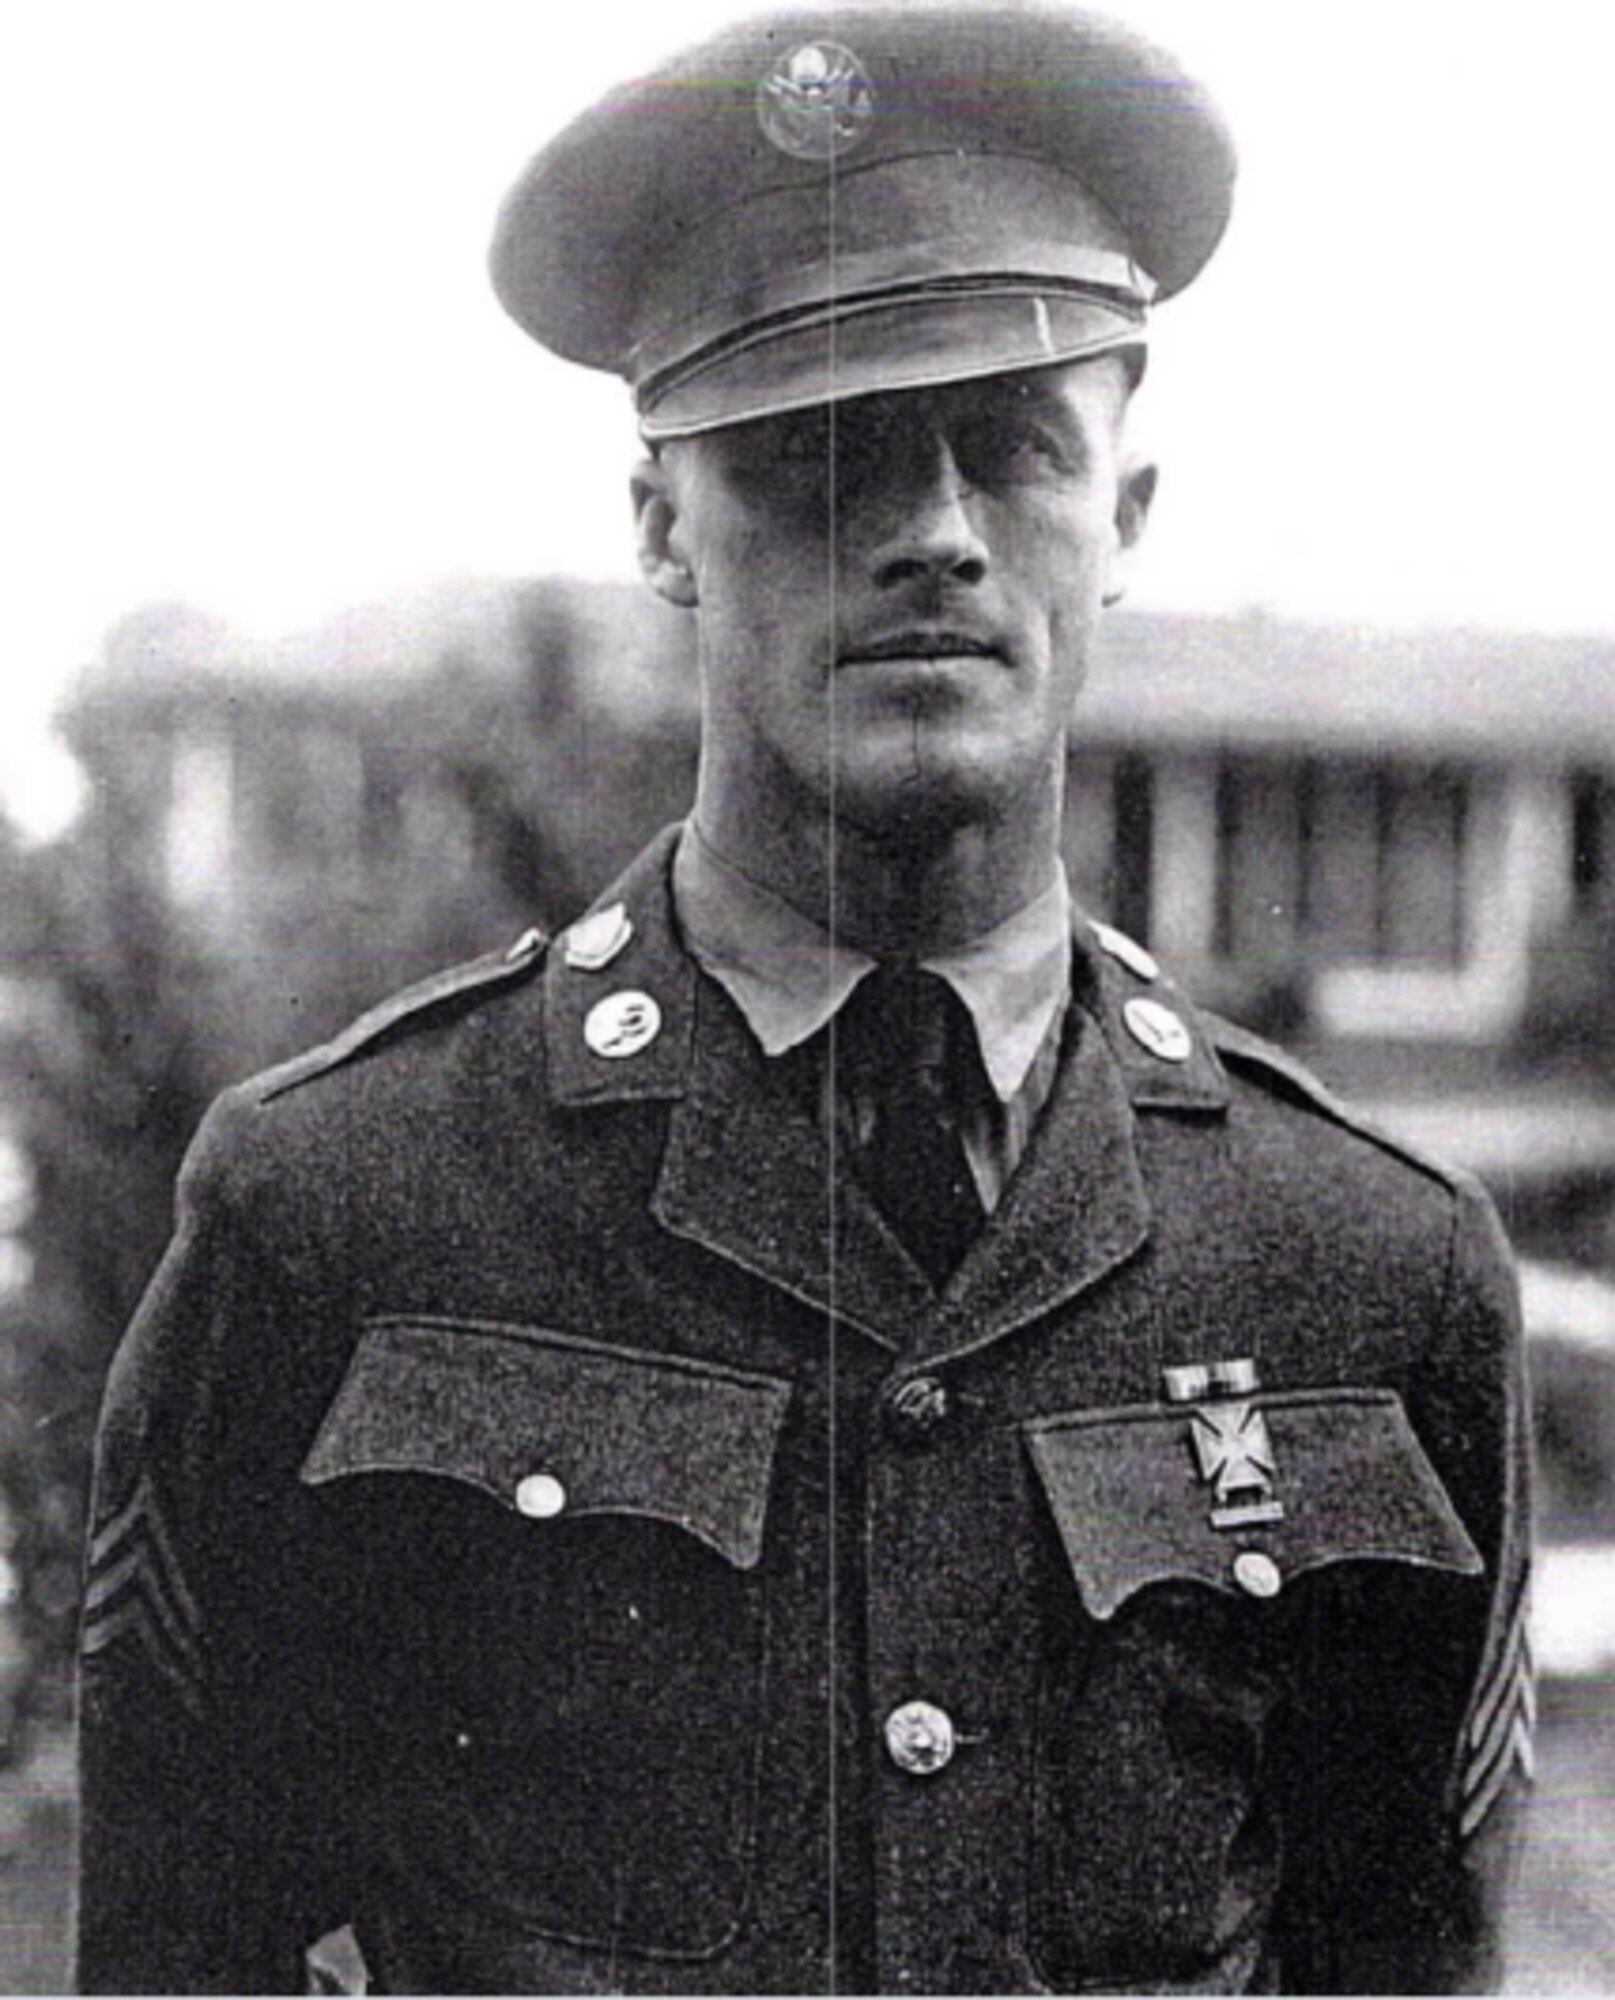 Historical Photo of man in uniform